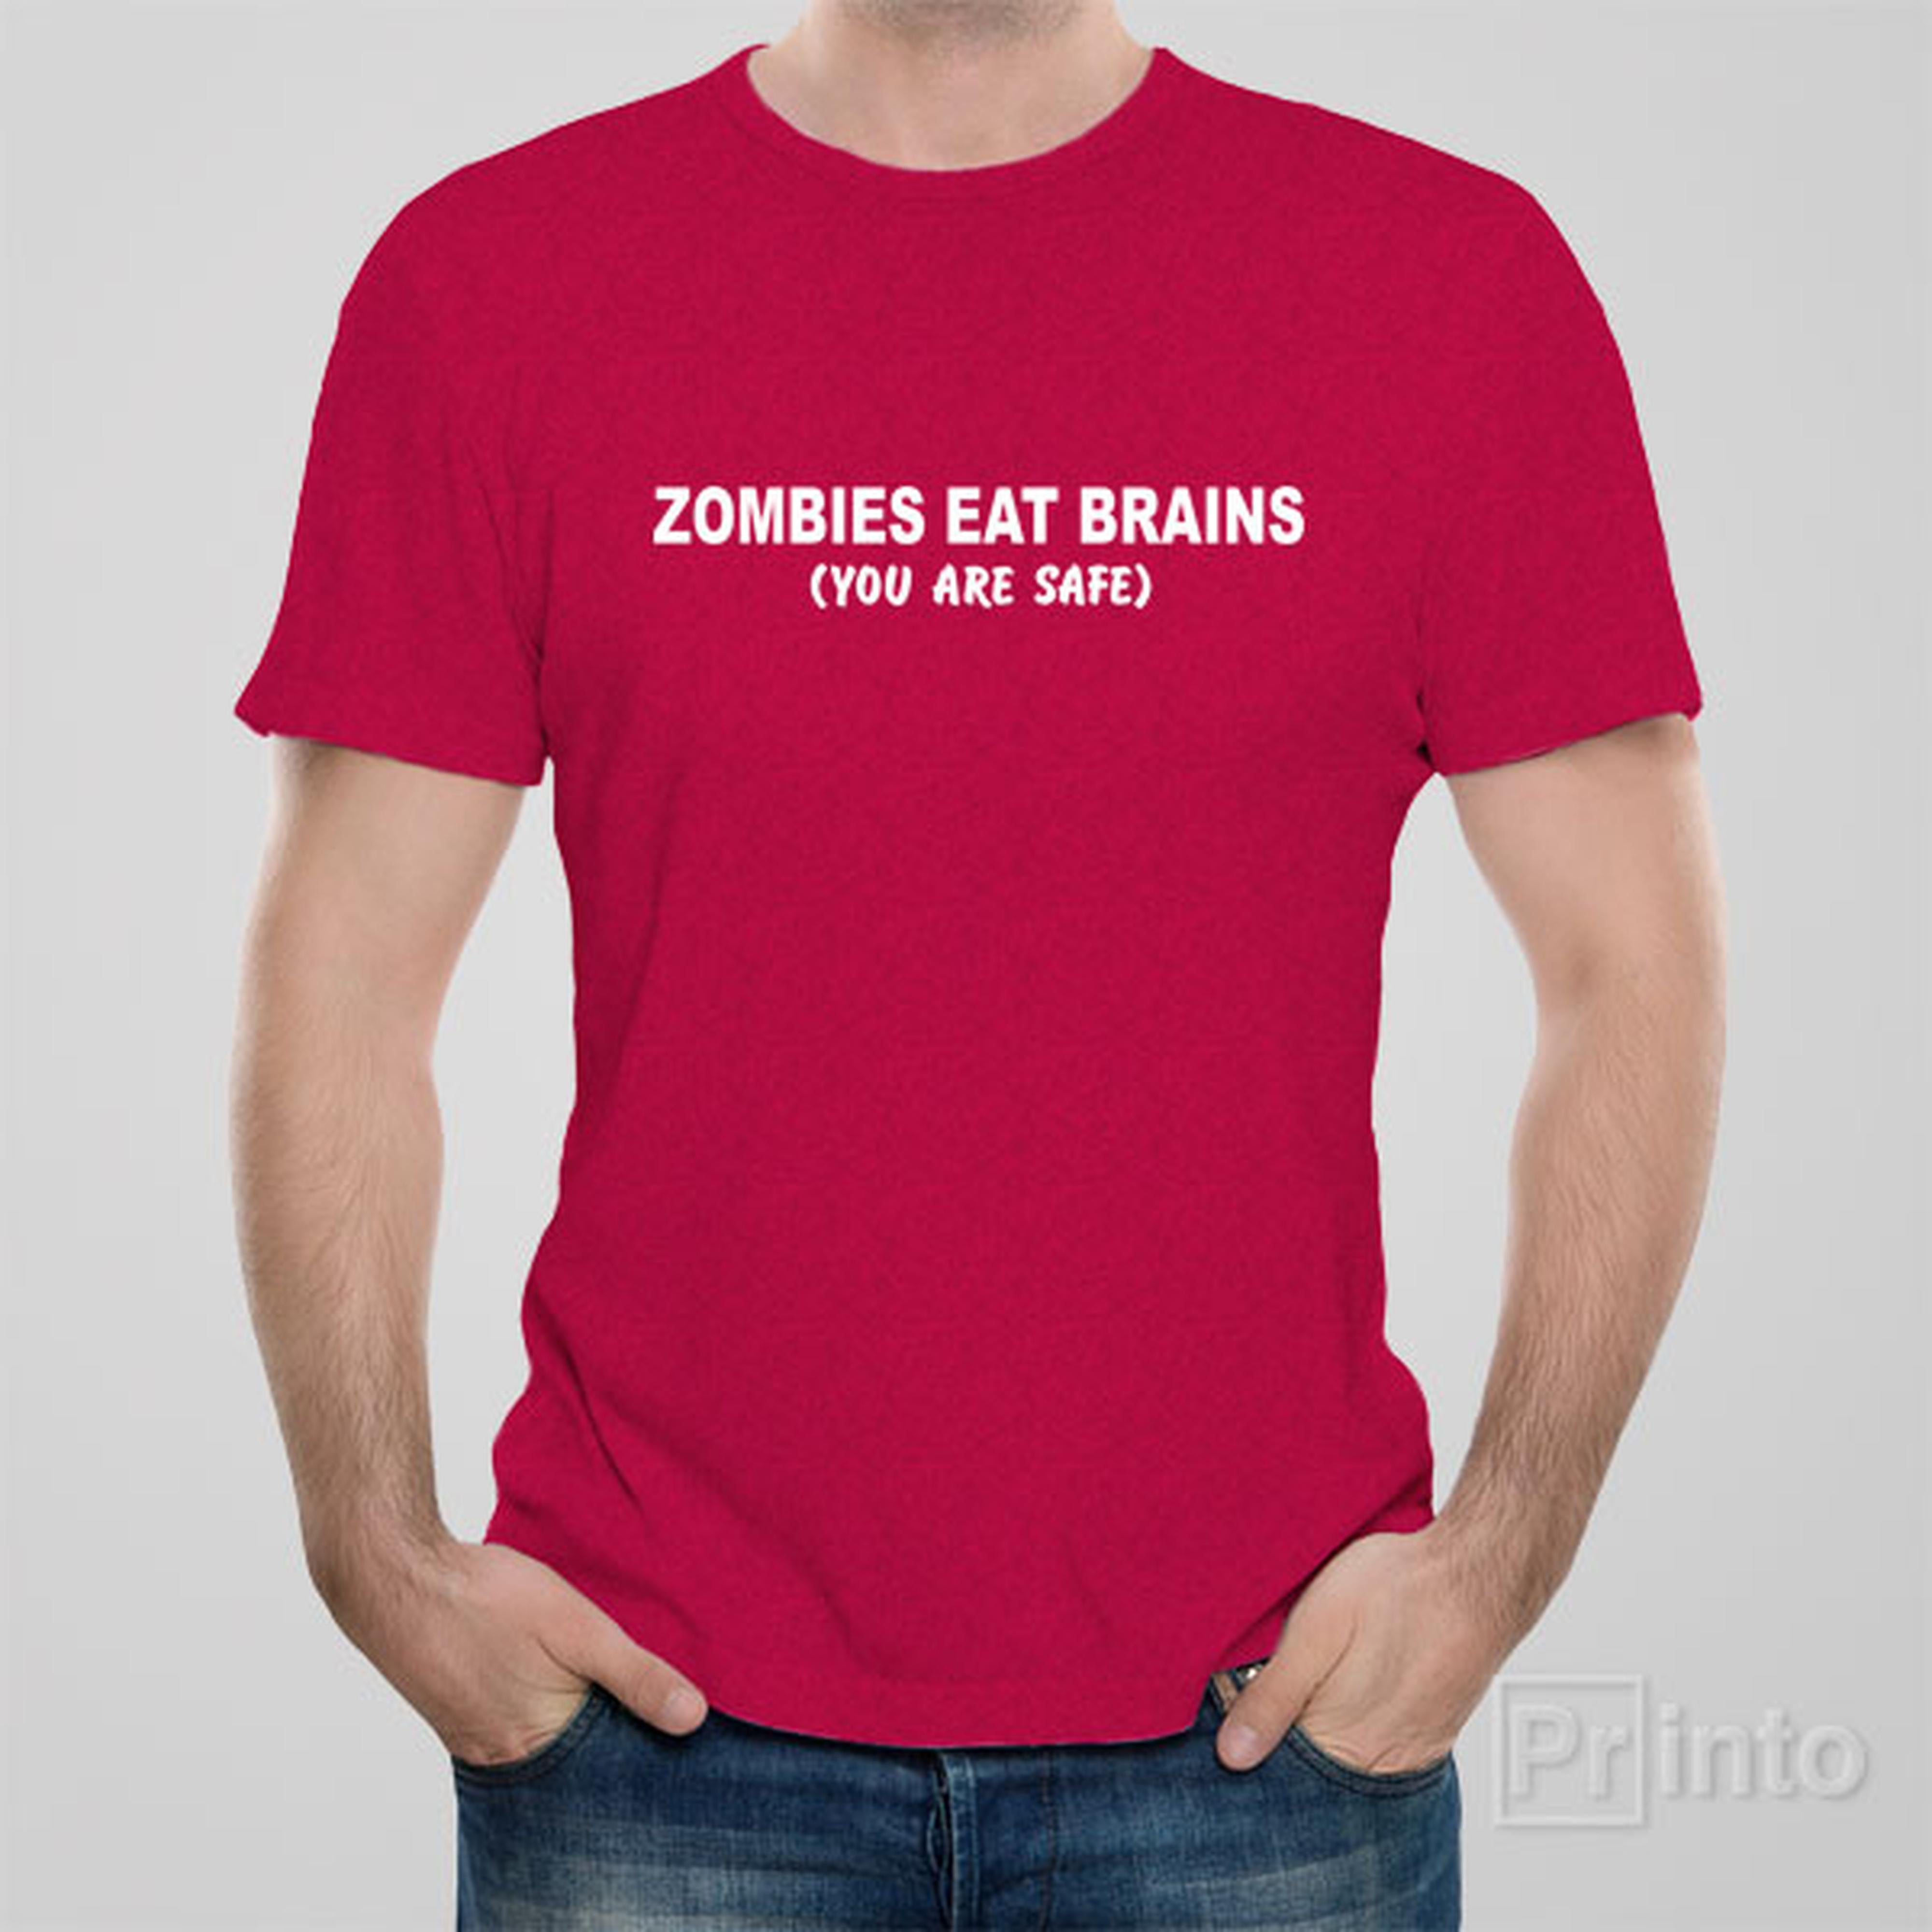 zombies-eat-brains-you-are-safe-t-shirt